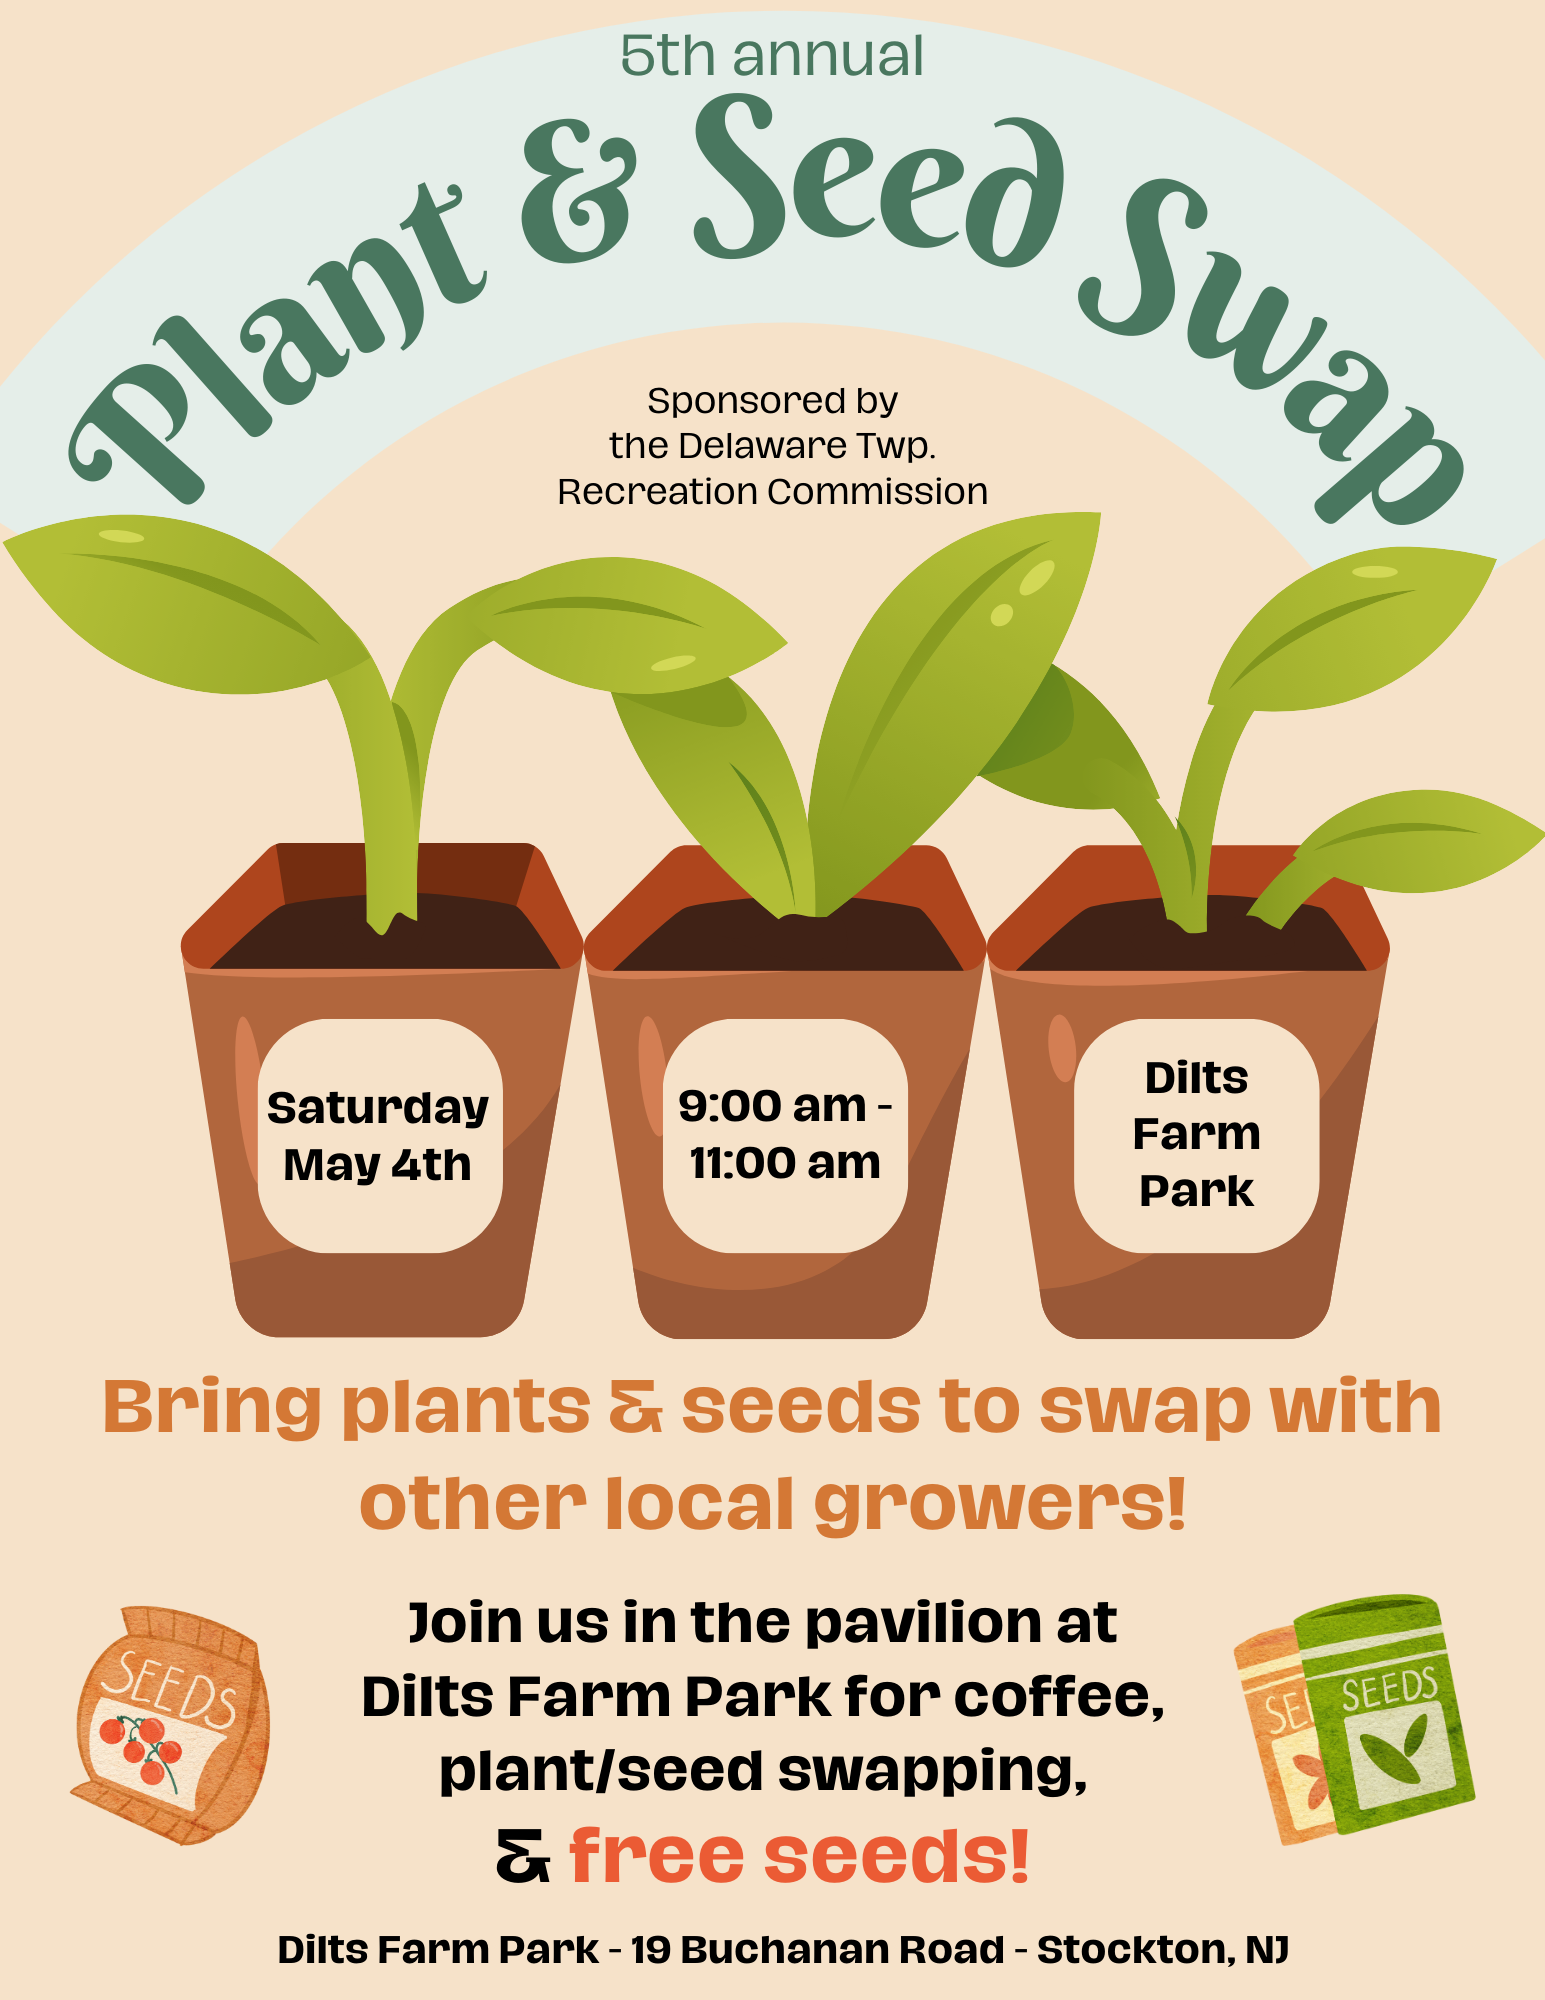 A plant and seed swap event flyer with a tan background and 3 cartoon images of plants in pots in the center. Details about the event are above and below the plants in text.